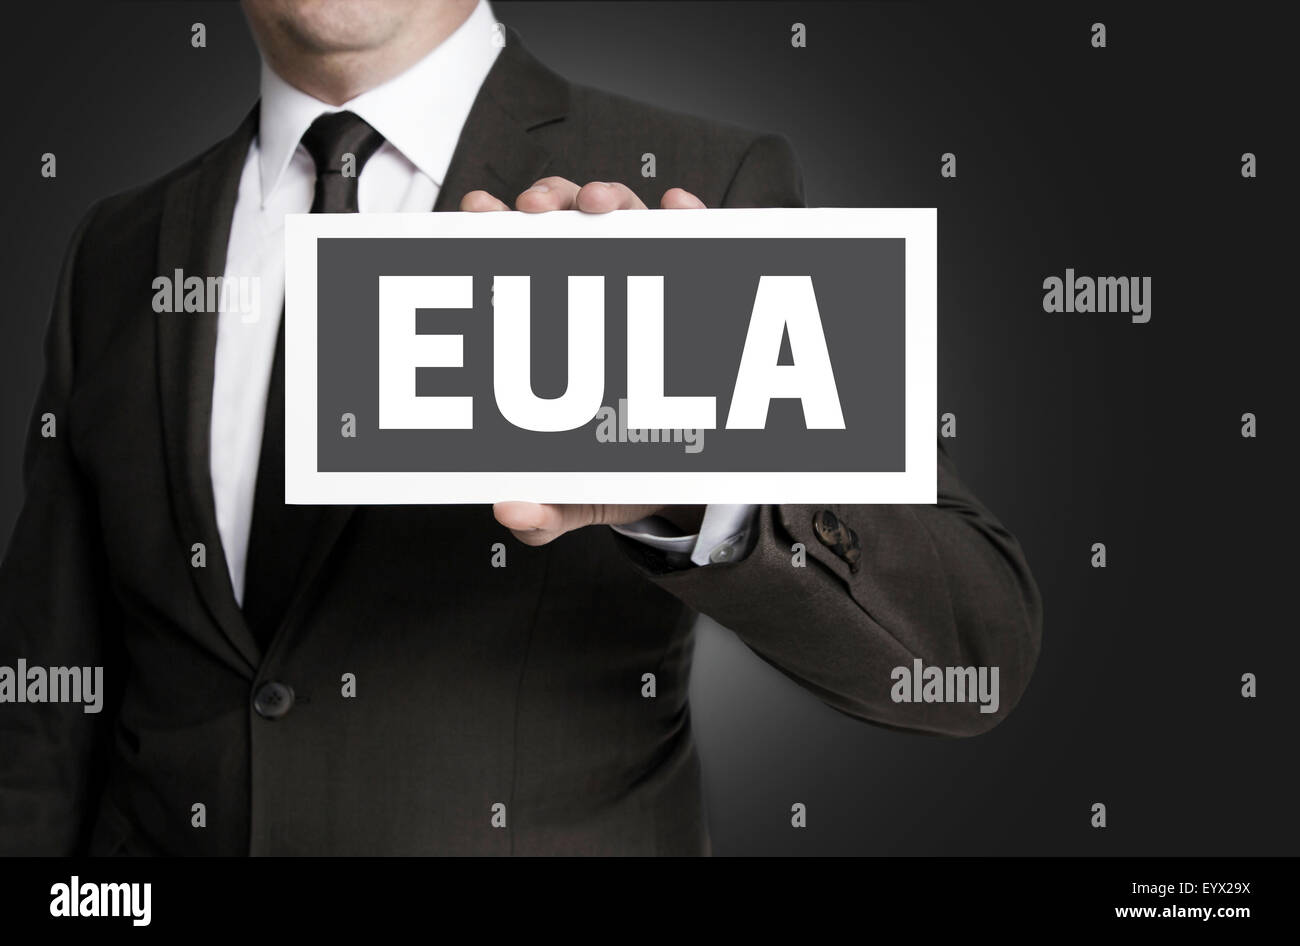 Eula sign is held by businessman. Stock Photo